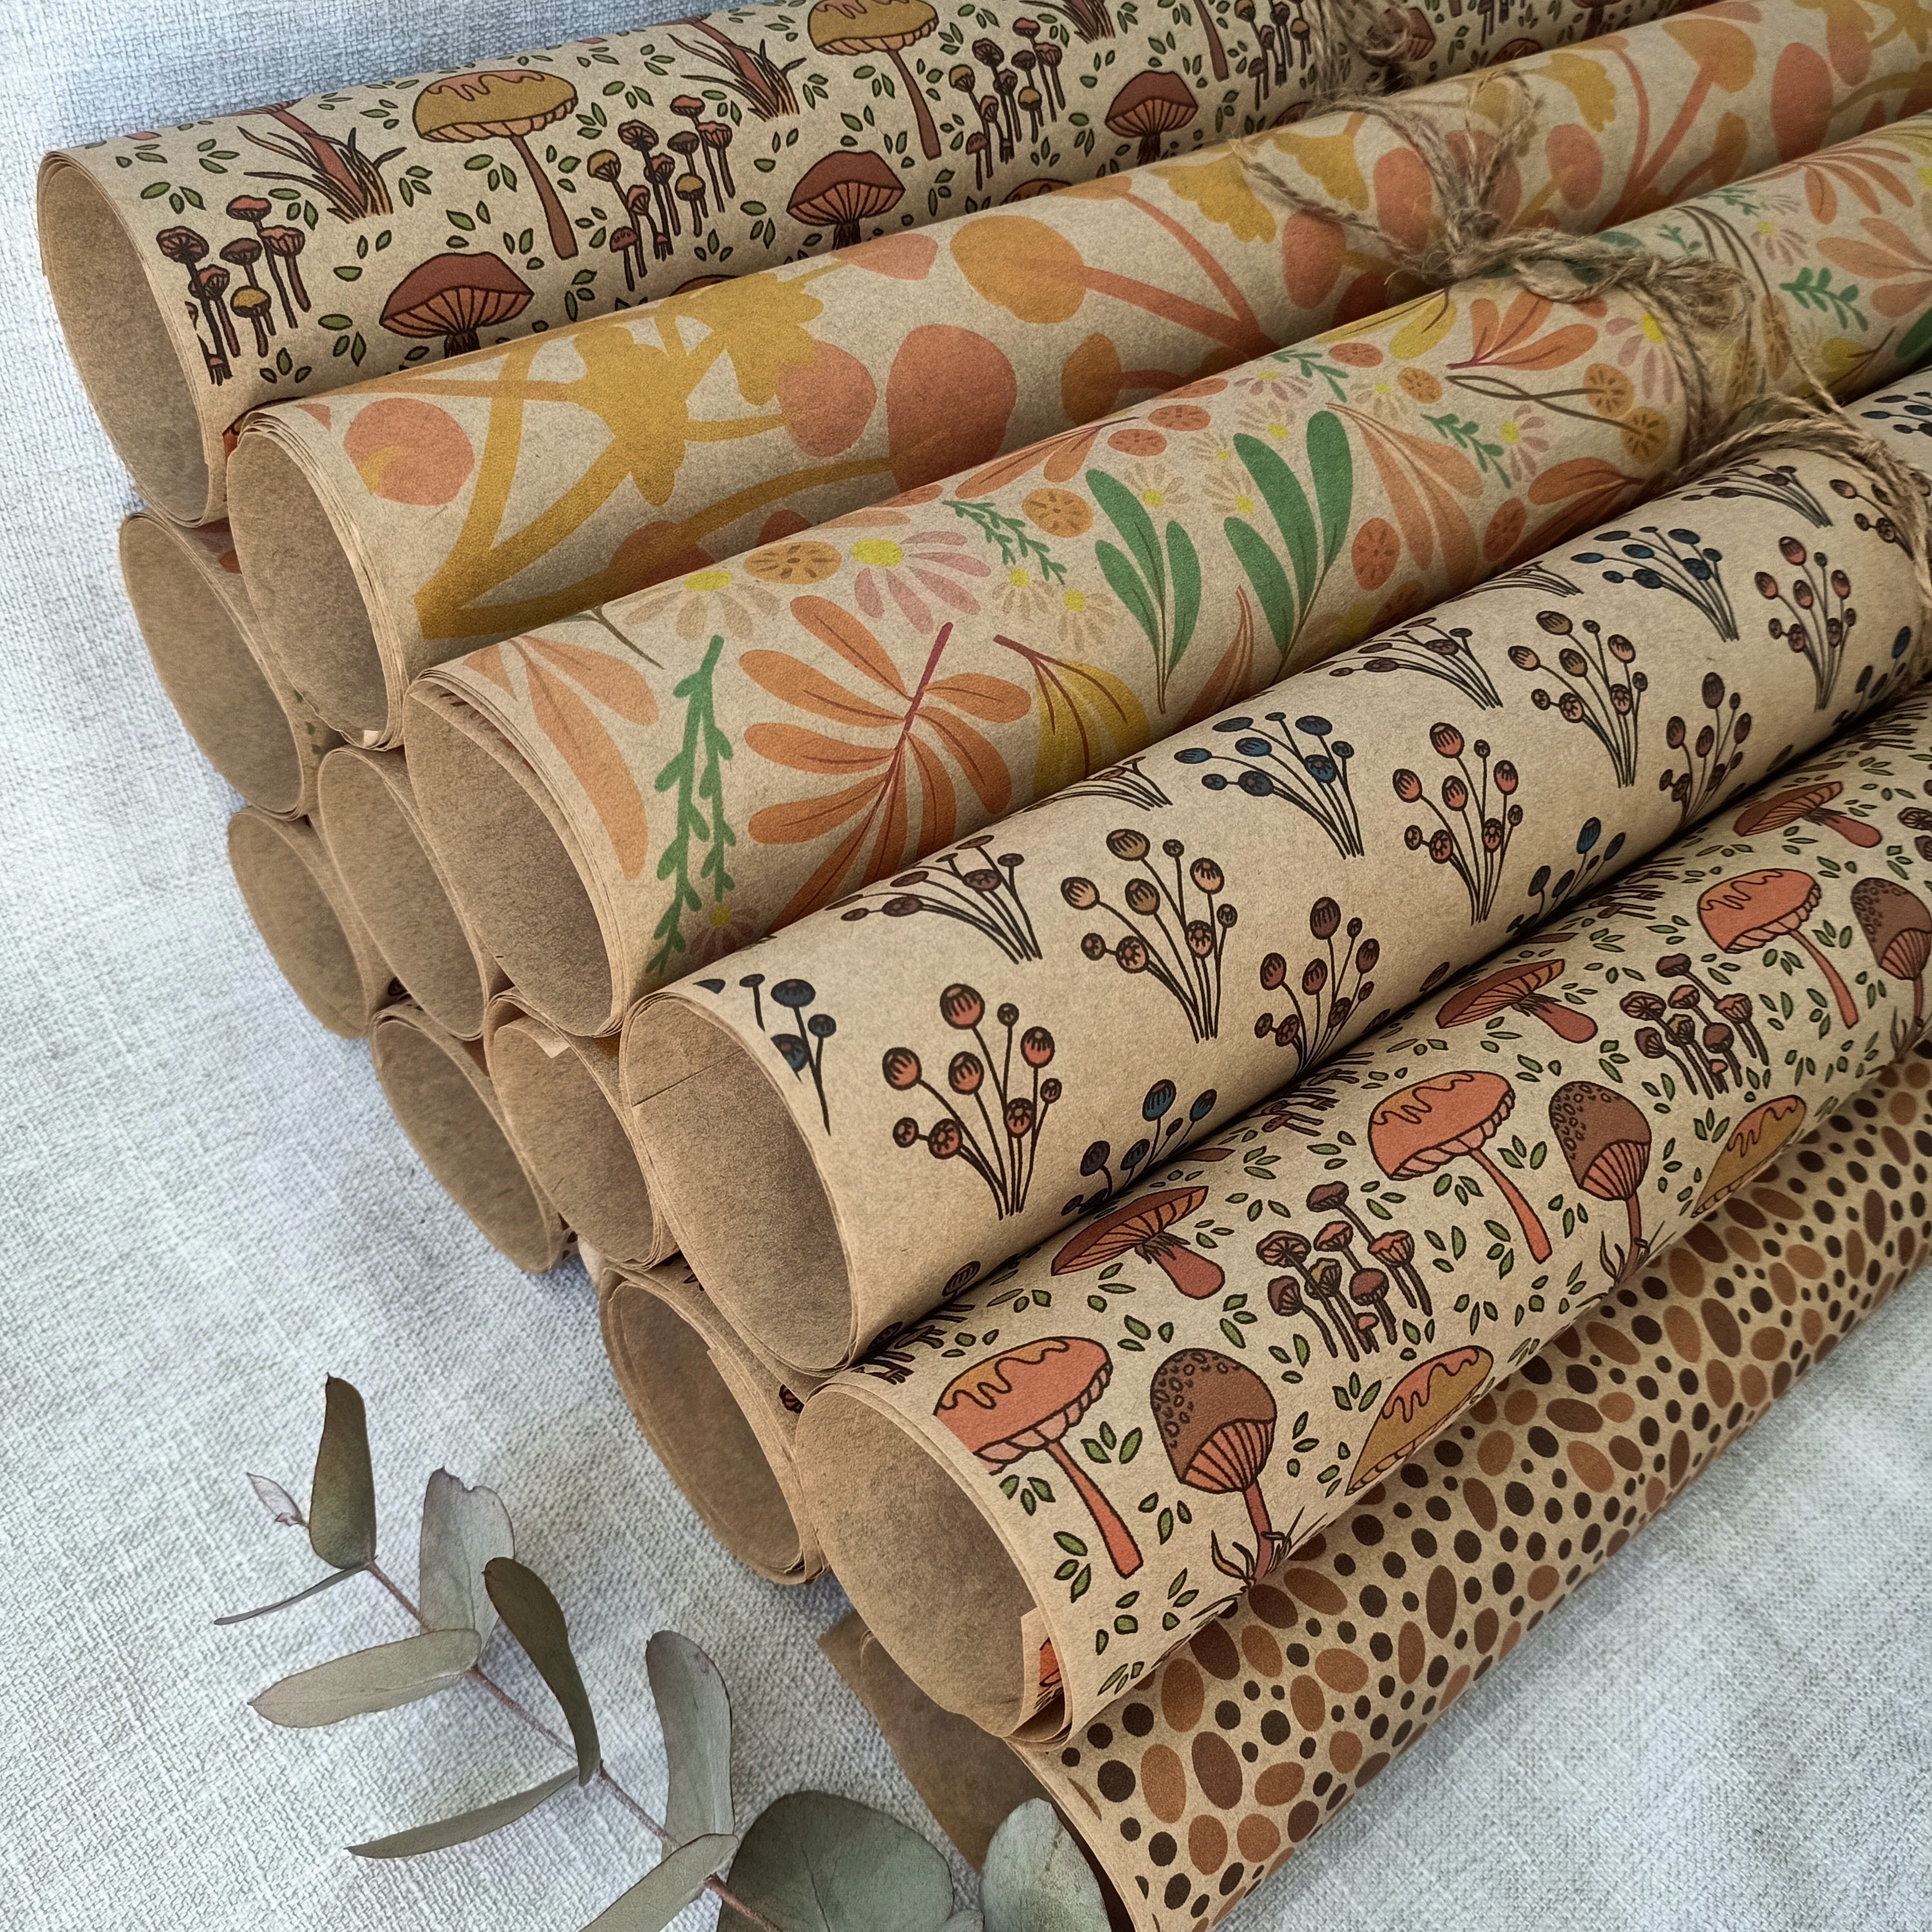 Beige Floral Tissue Wrapping Paper / Gift Tissue Paper / Floral Wrapping  Tissue Paper / Packaging Supplies 